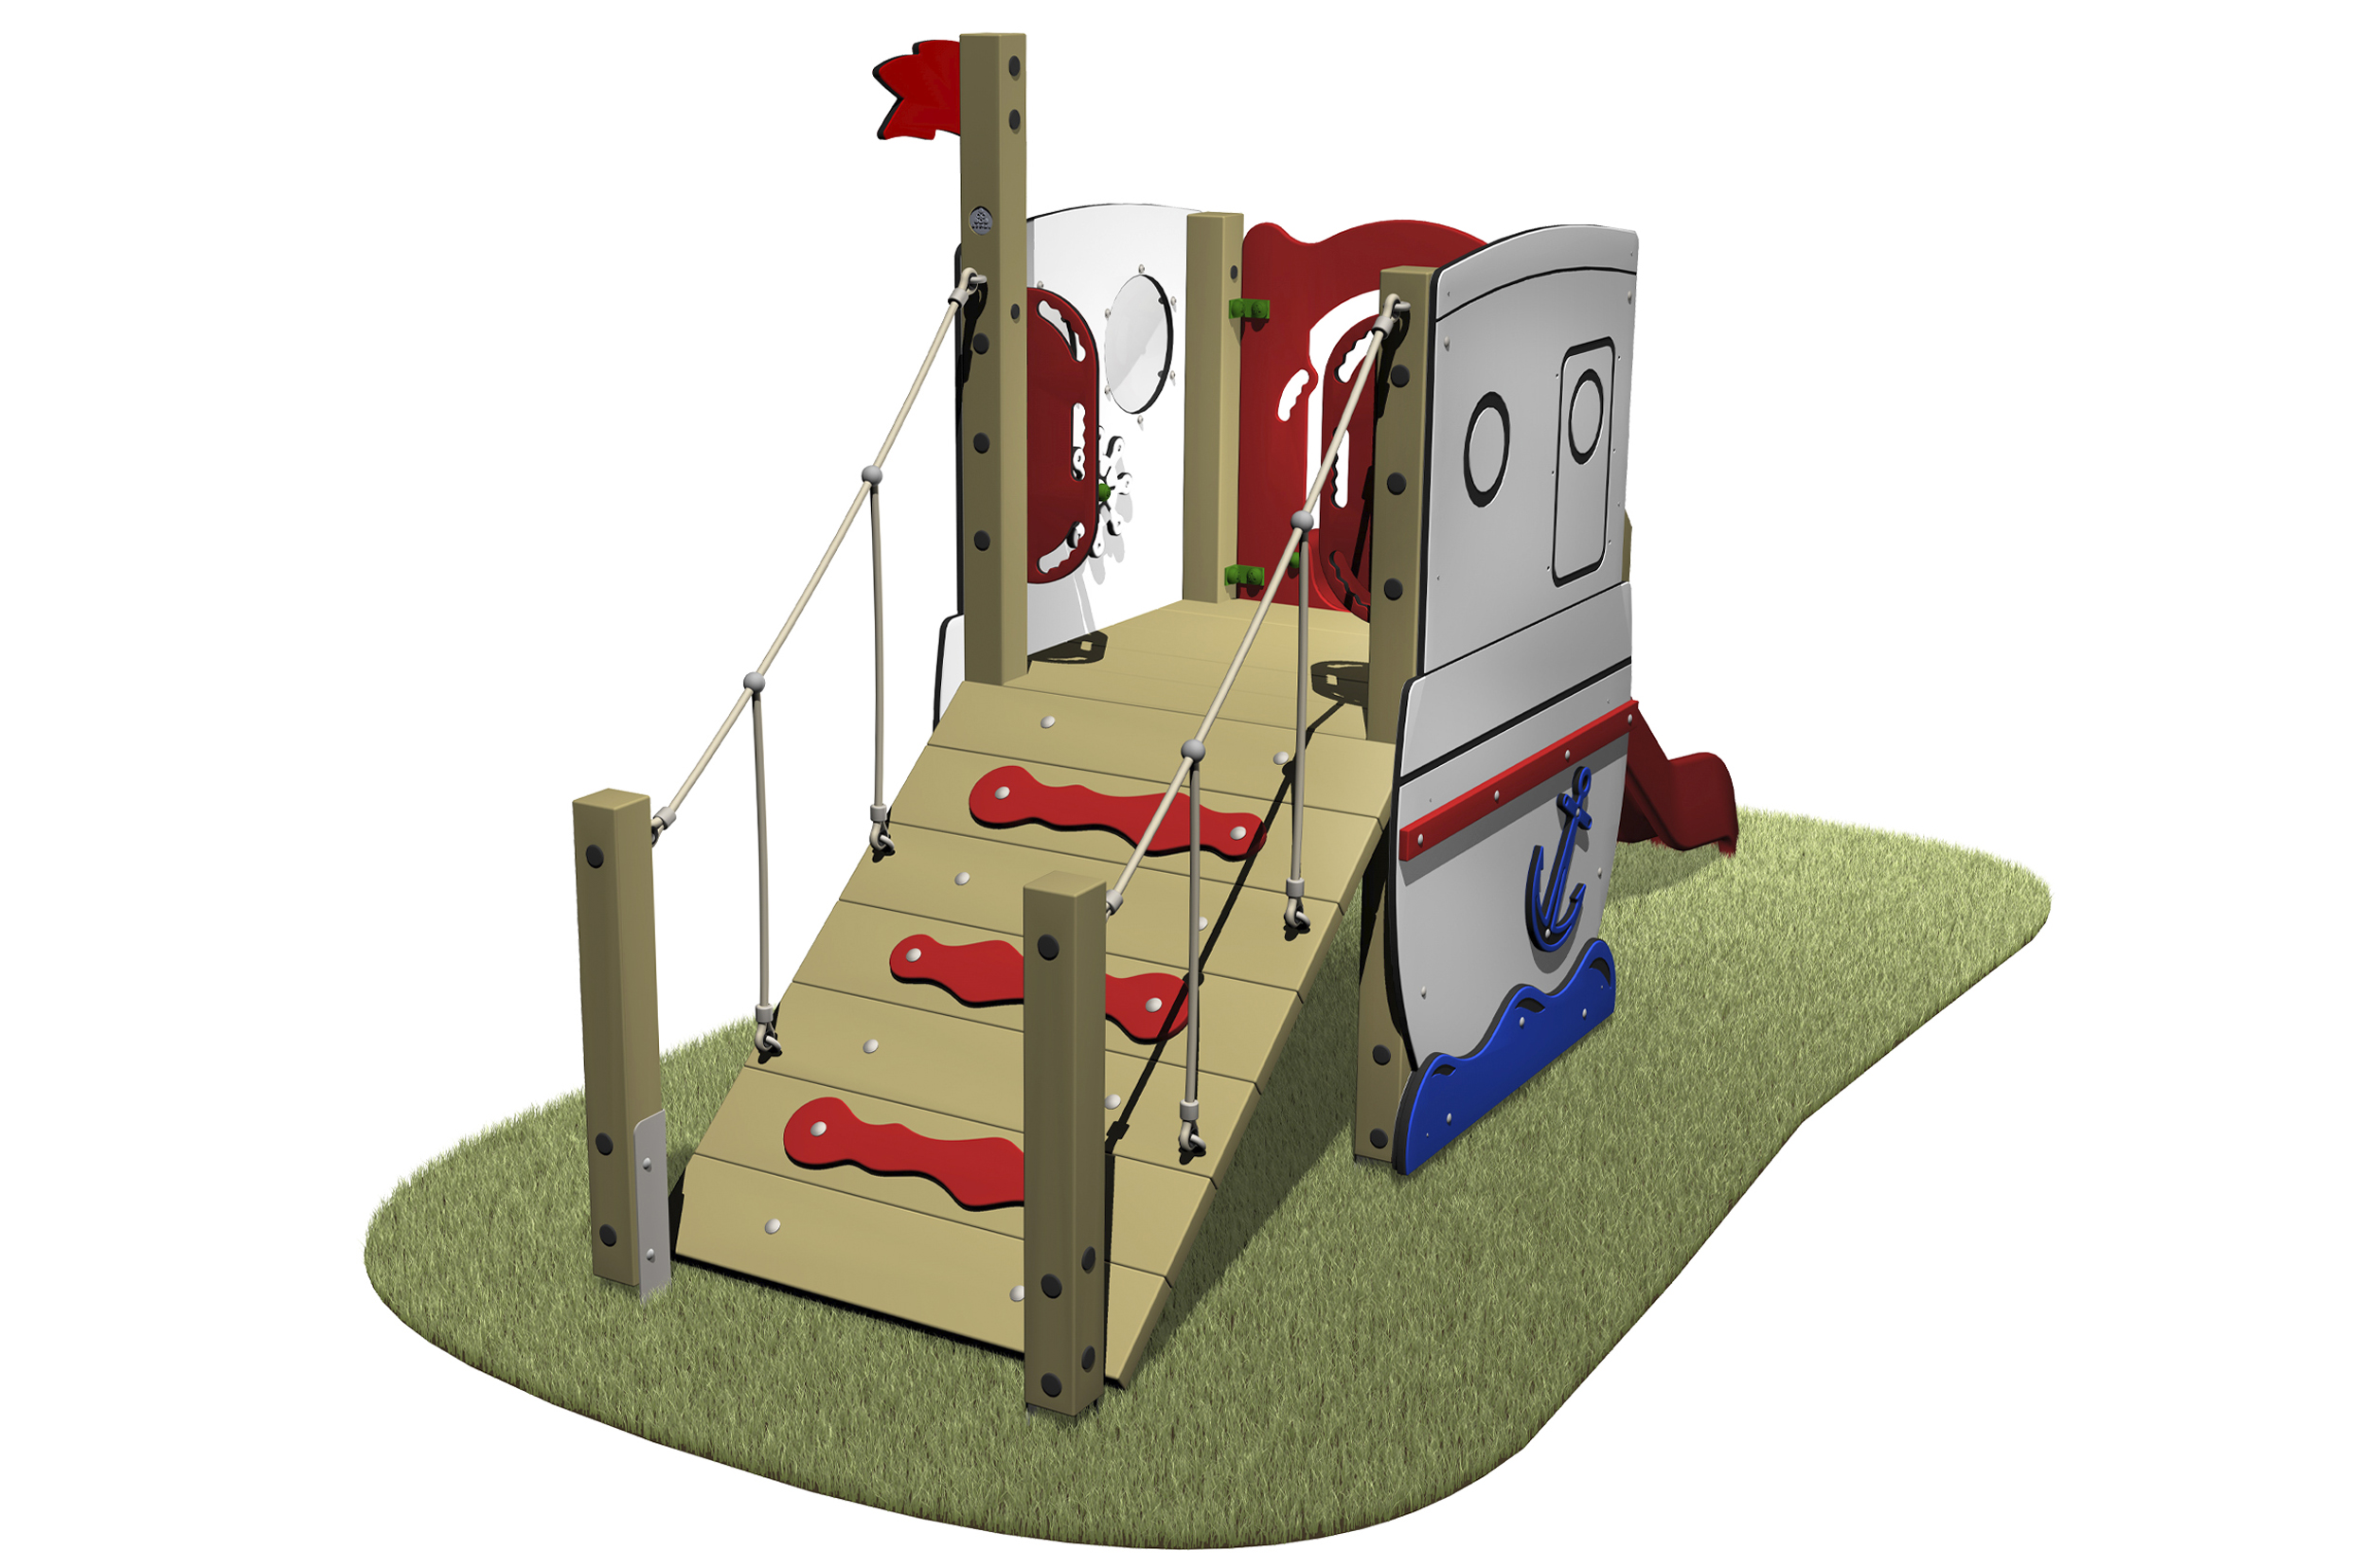 The Boat Slide is has a red slide, boat themed with portholes, flag and sloping ramp